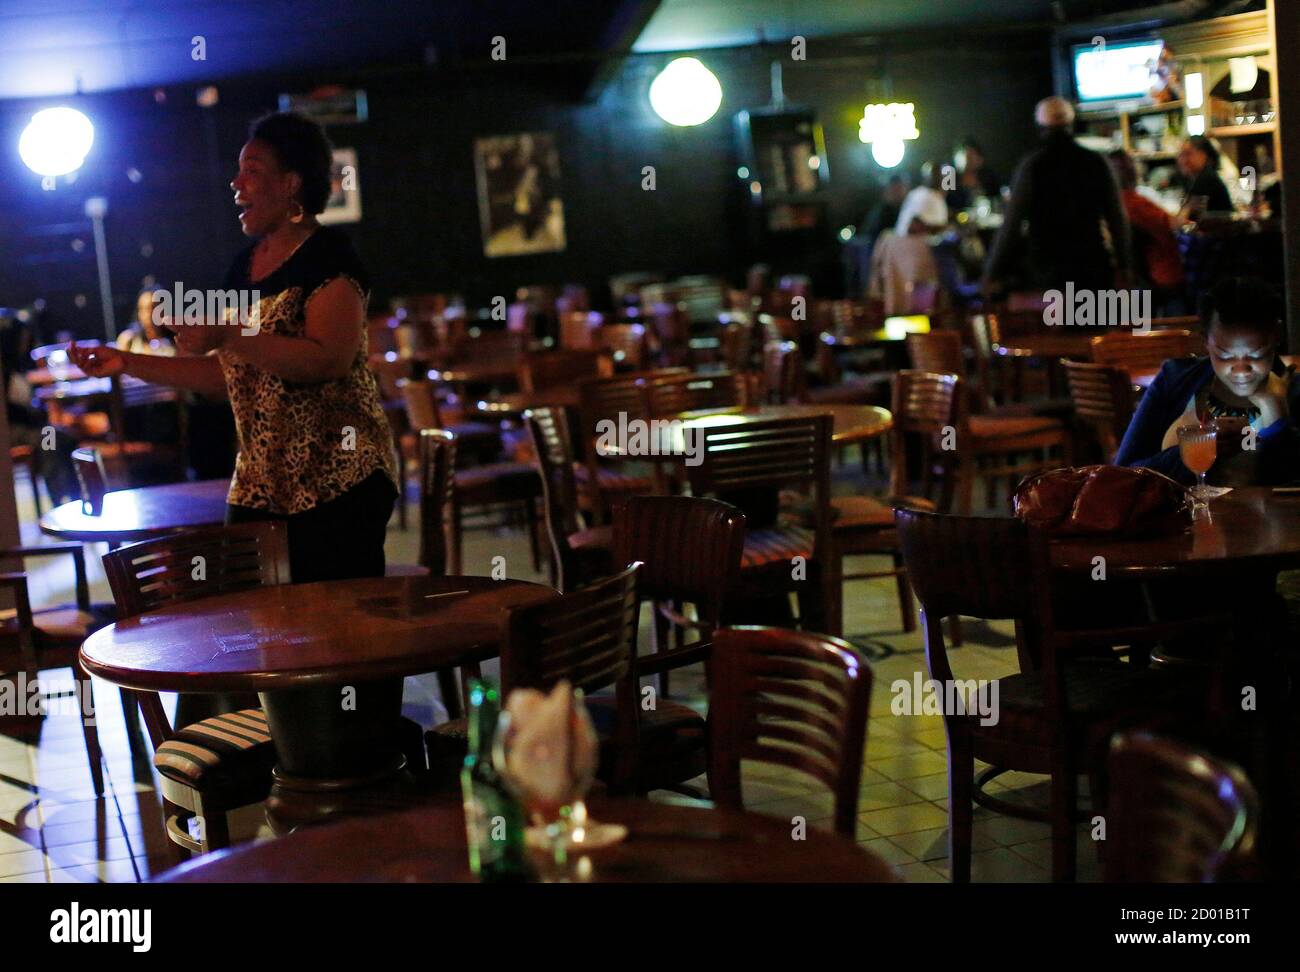 Tammy Harris dances among the tables at the Checkerboard Lounge in Chicago,  Illinois, May 24, 2014. The Checkerboard Lounge, the South Side of Chicago  club that hosted the Rolling Stones, Eric Clapton